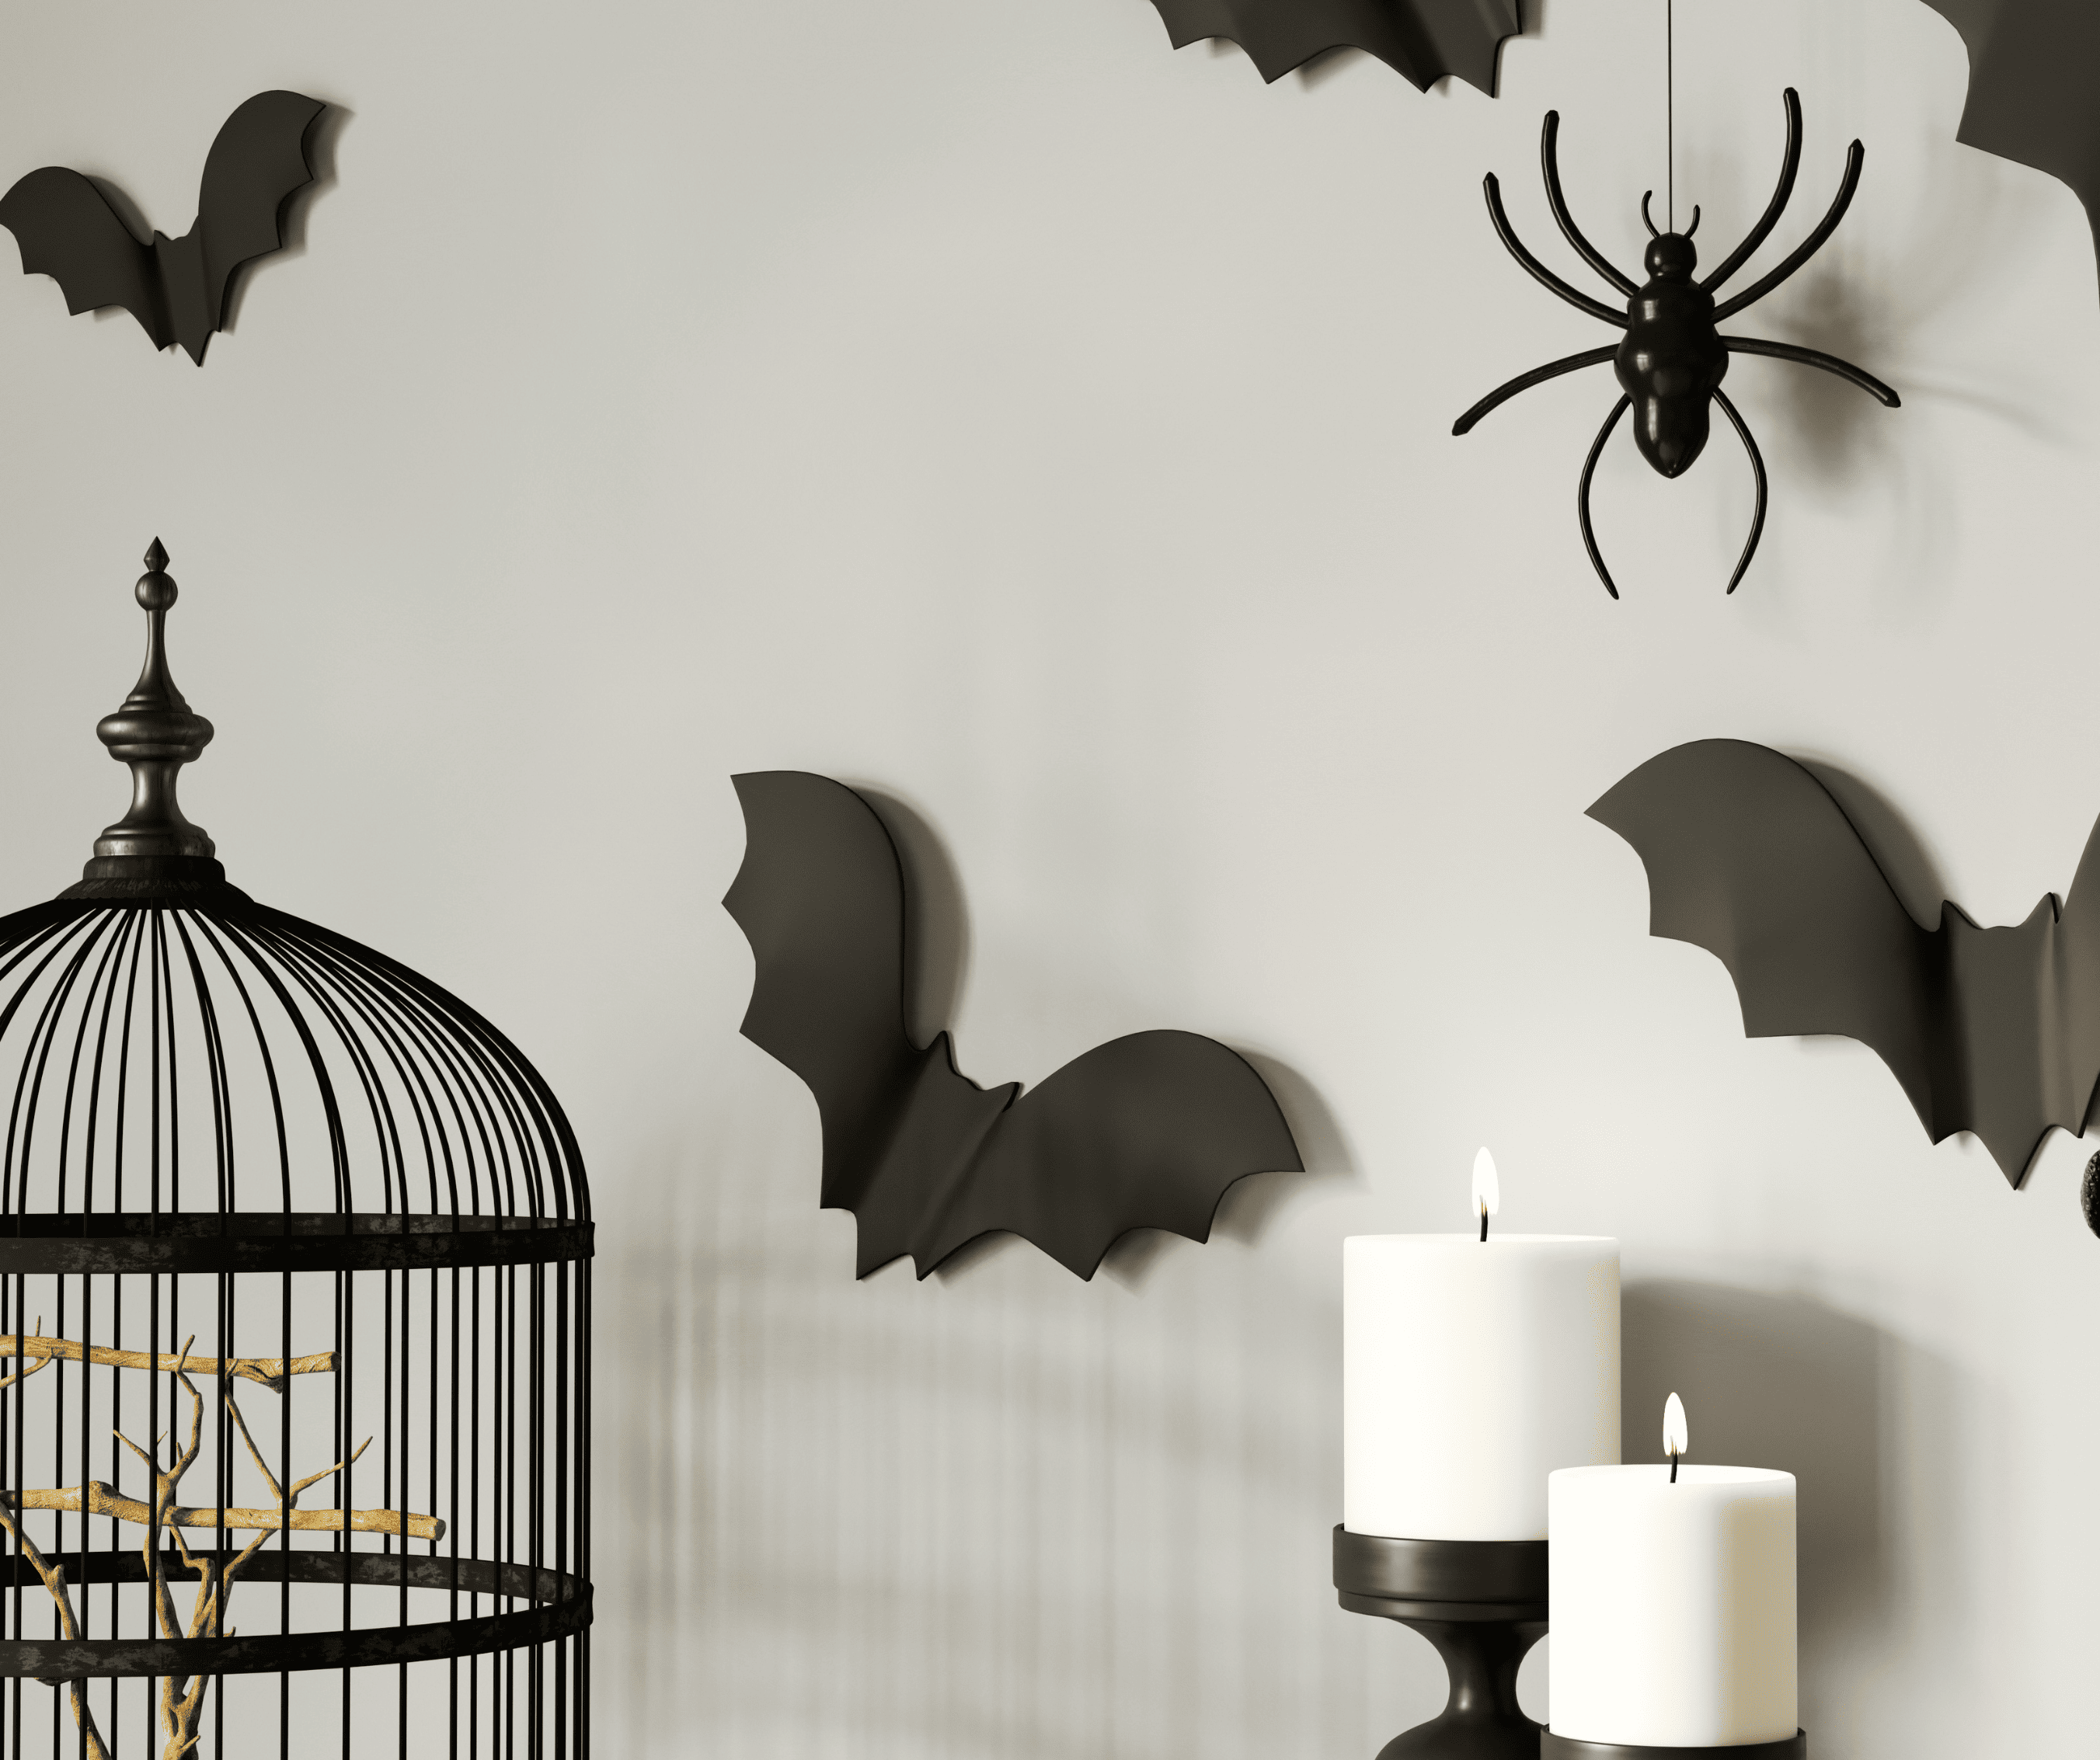 A stock image of monochromatic Halloween decorations - start your search on Share to Buy today!